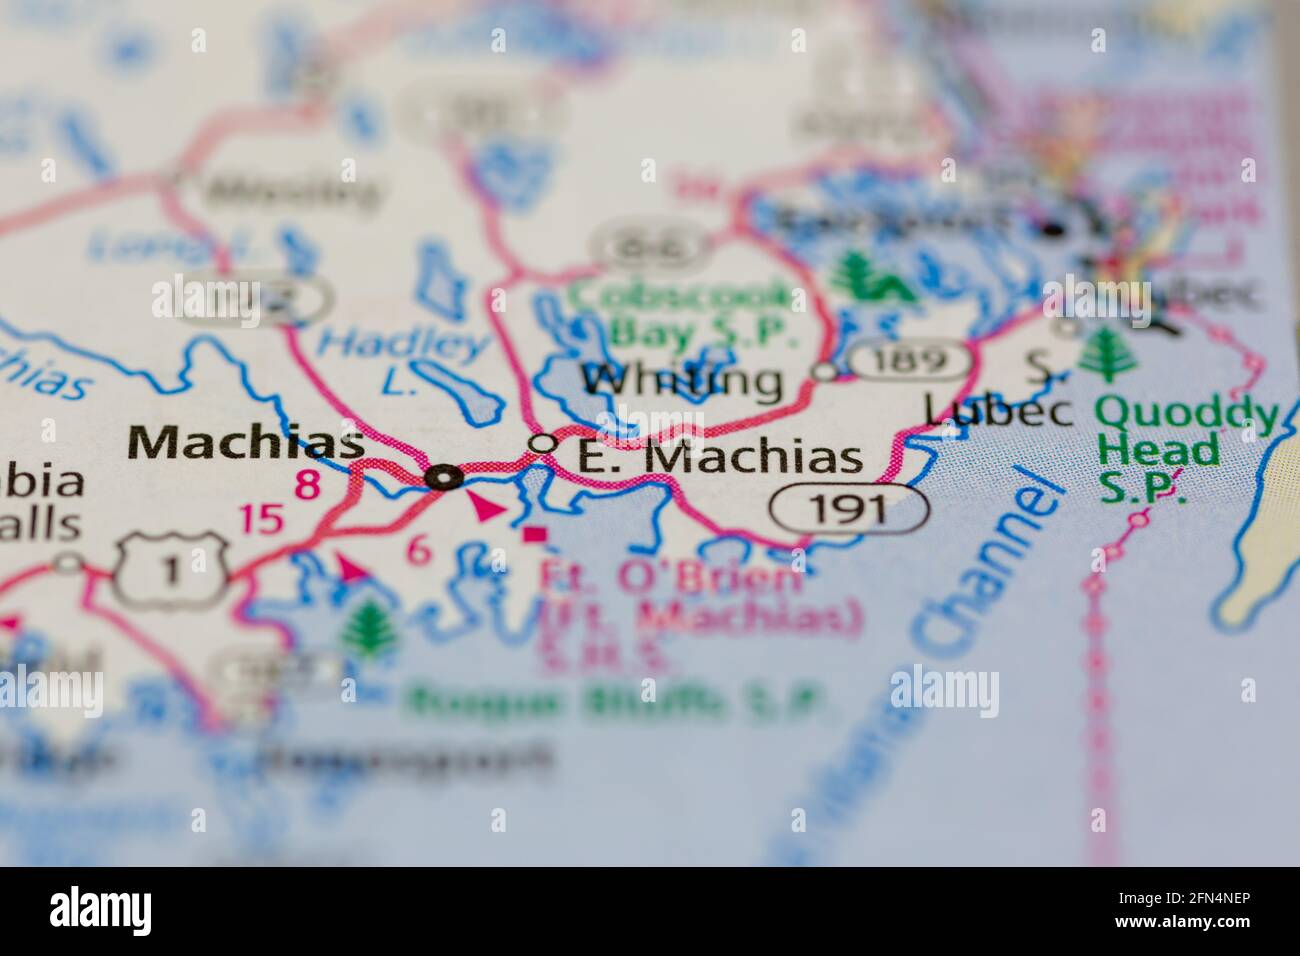 East Machias Maine USA shown on a Geography map or road map Stock Photo